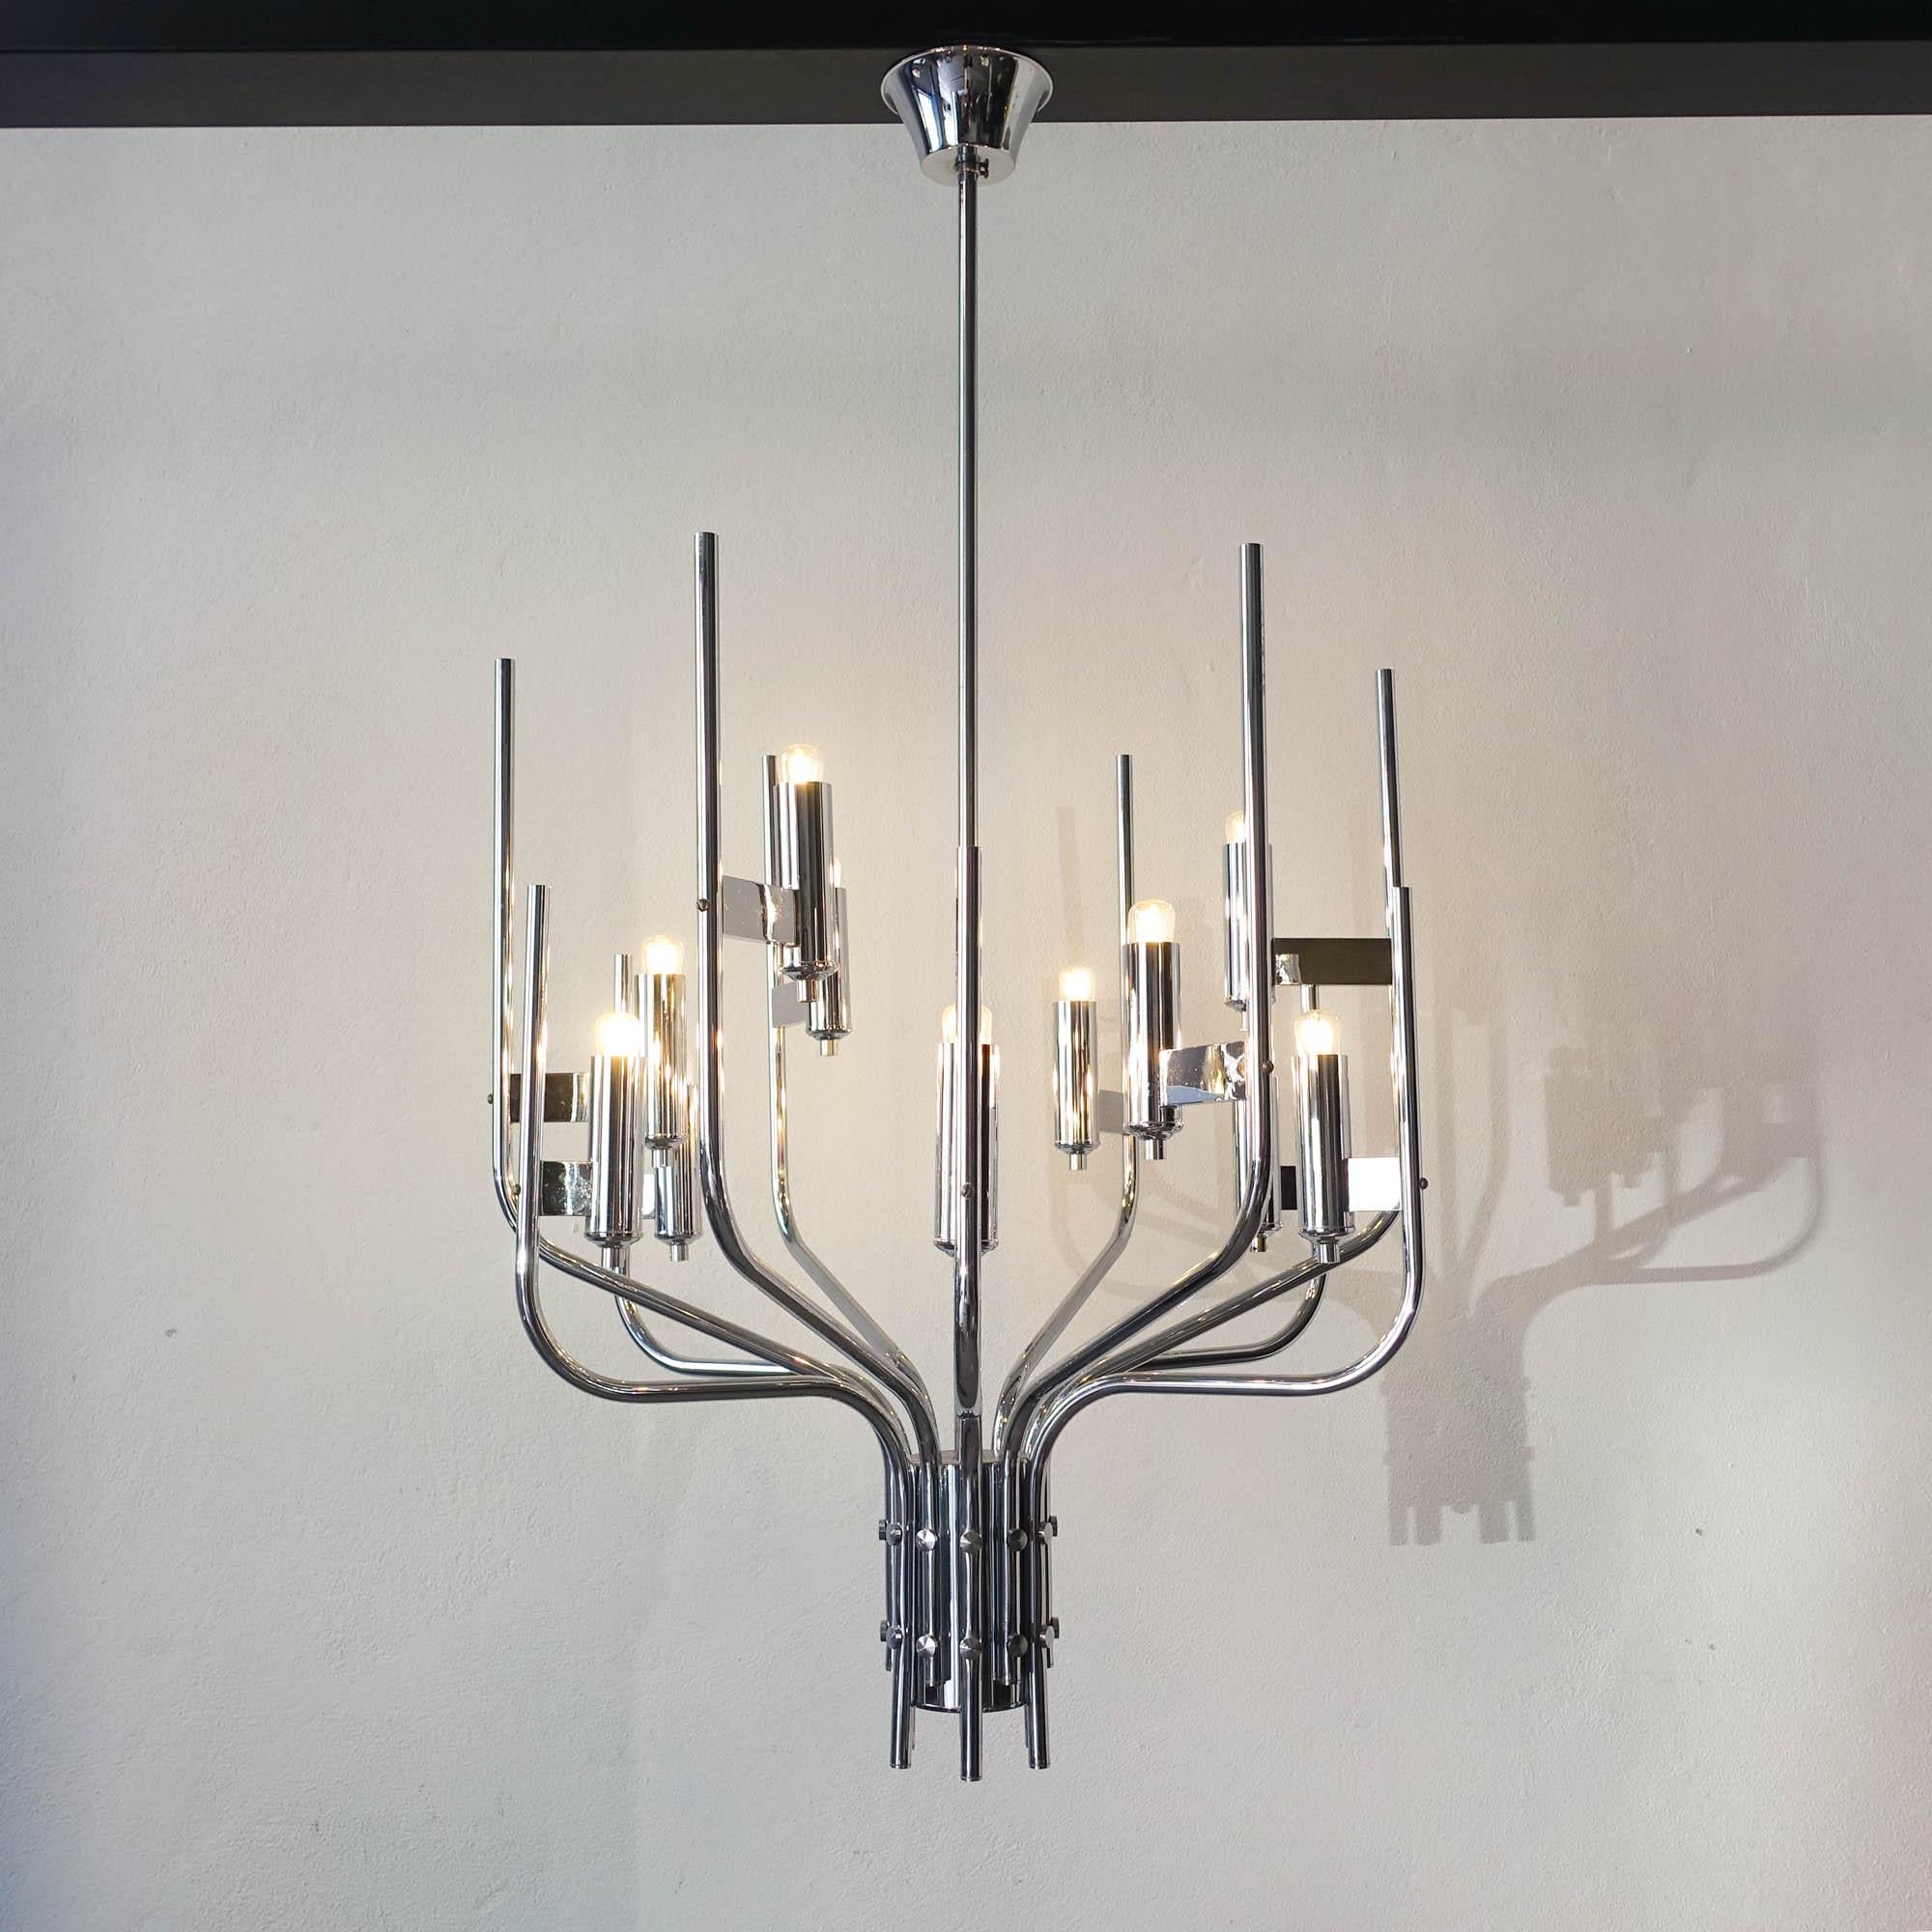 This piece was designed by Gaetano Sciolari, in Italy, during the 1970's. It has a minimalist design, inspired in the old chandeliers. With a chromed frame, the fixture requires 12 E14 bulbs. The electric system can work in two distinct phases.